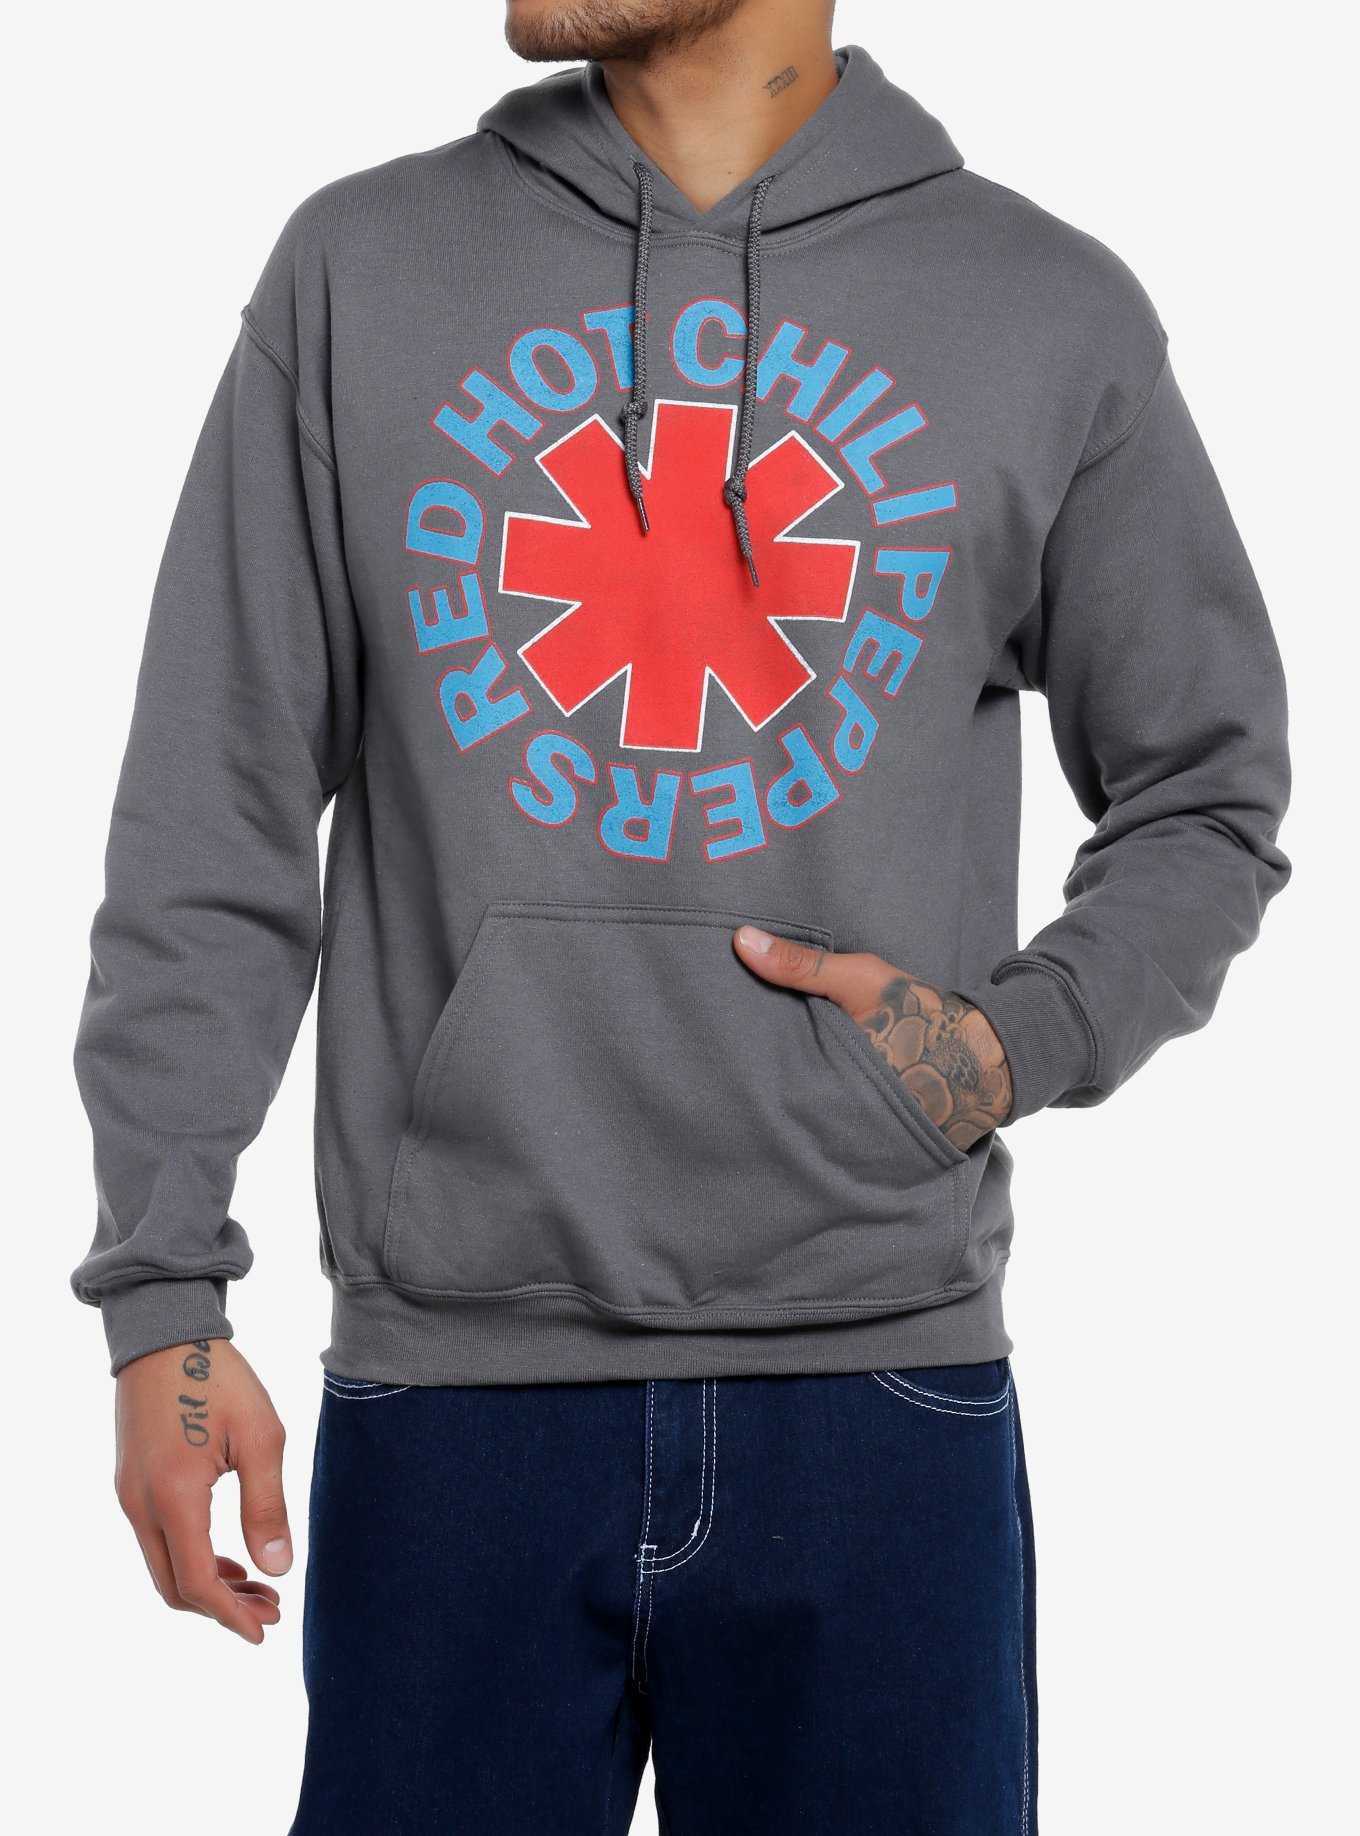 Red Hot Chili Peppers Logo Grey Hoodie, , hi-res